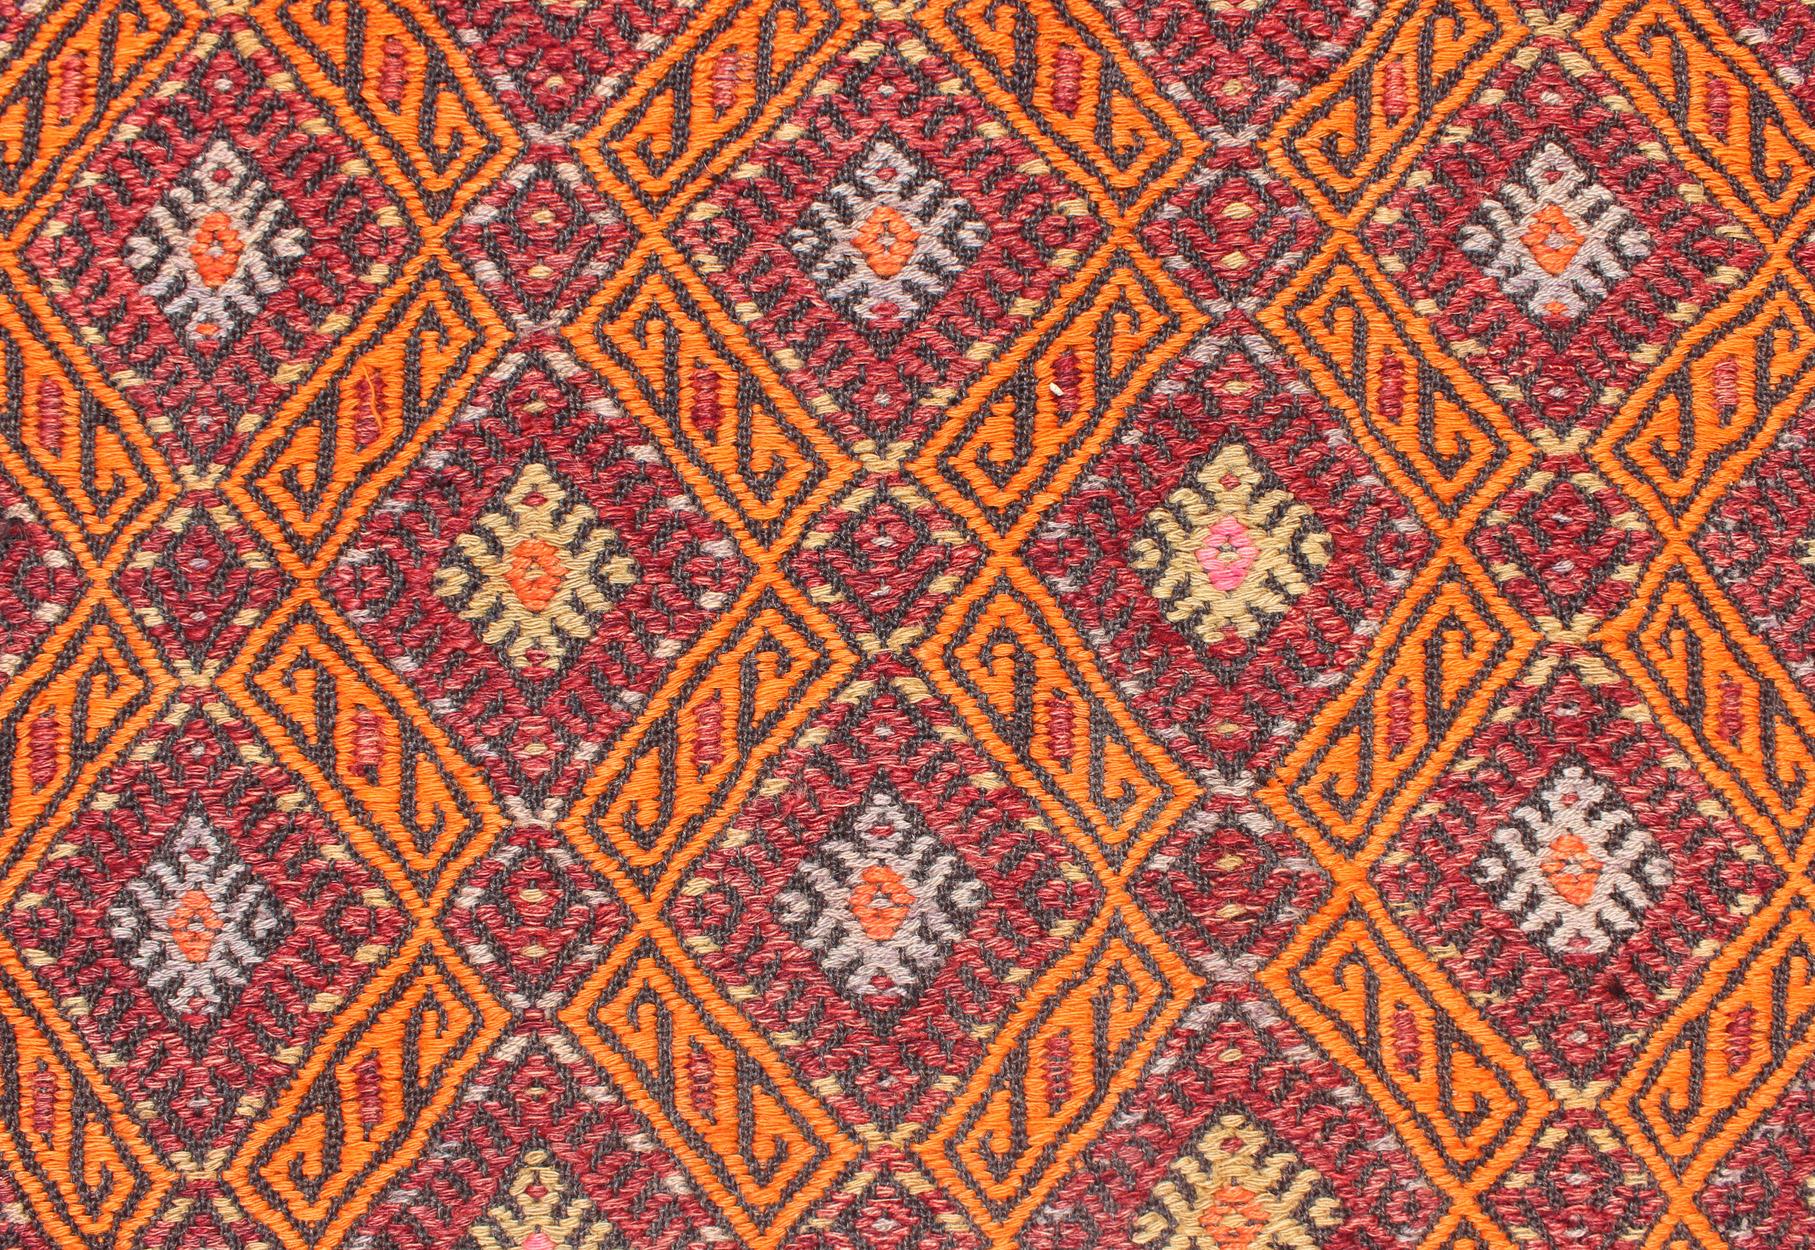 Wool Vintage Embroidered Kilim in Orange, Red, light Blue and yellow Colors